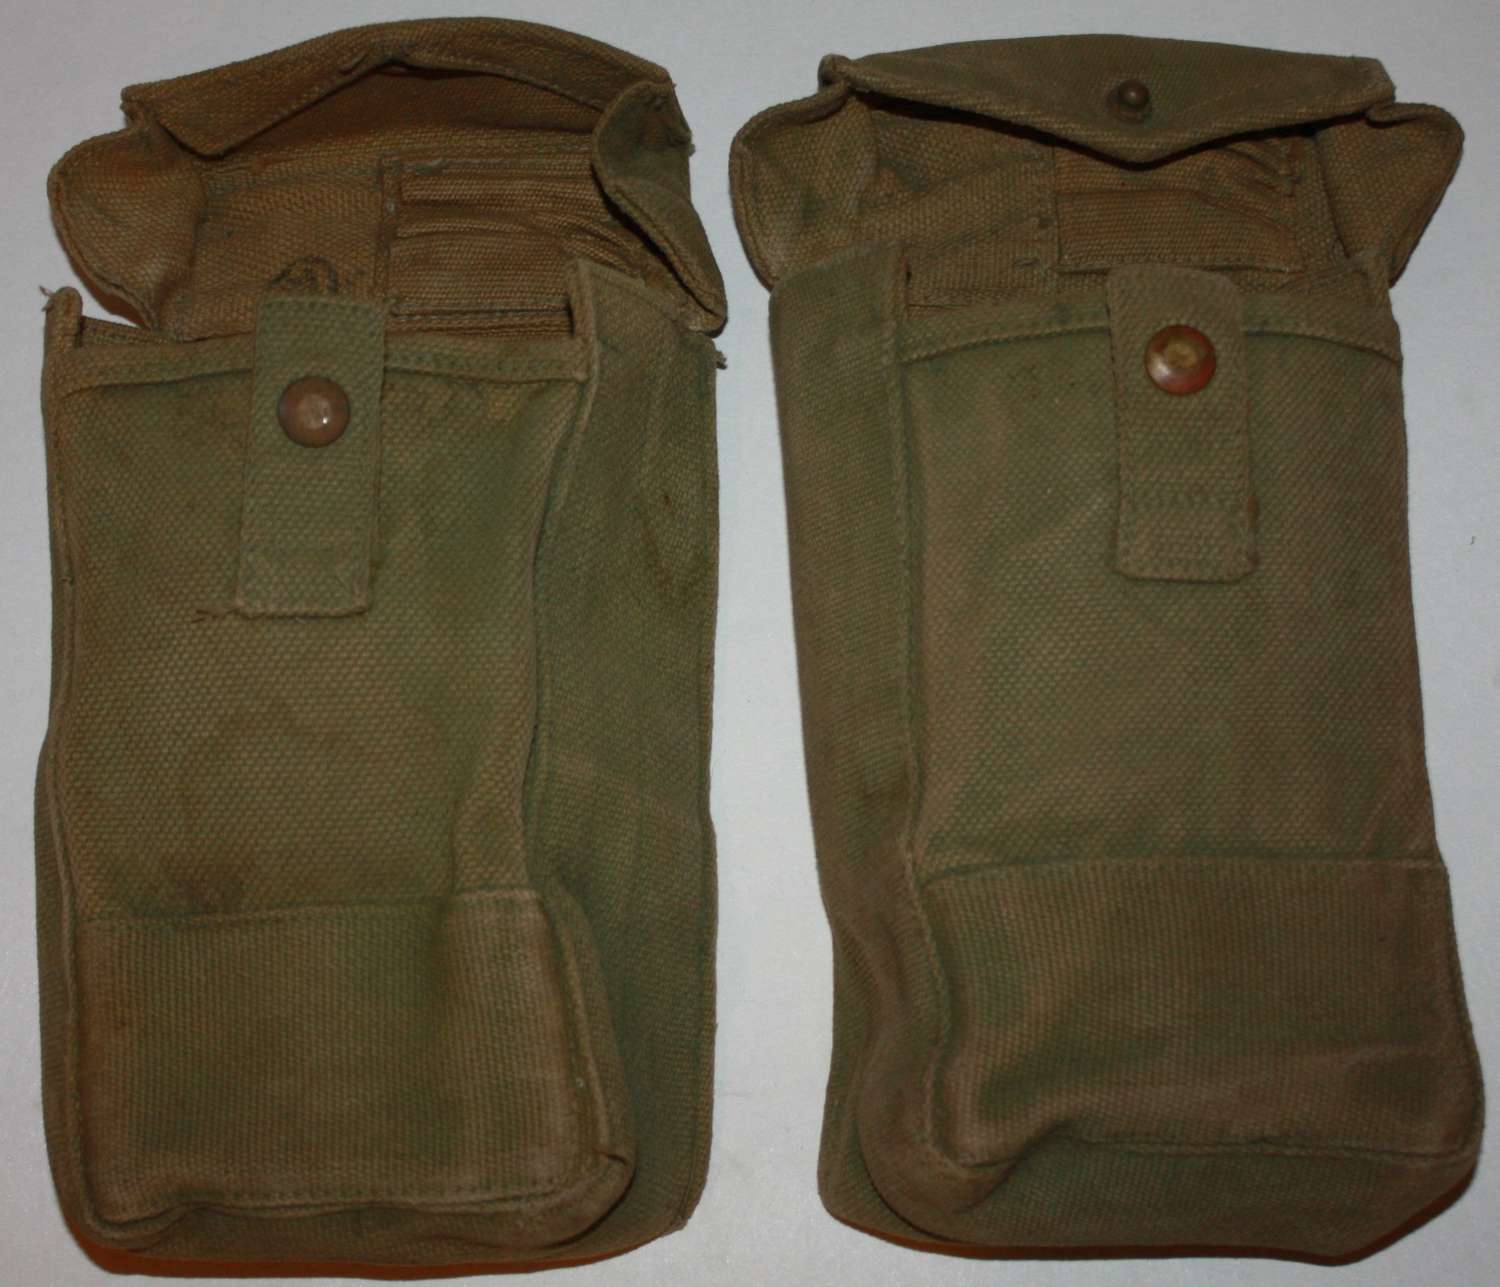 A GOOD MATCHING PAIR OF CANADIAN AMMO POUCHES USED EXAMPLES